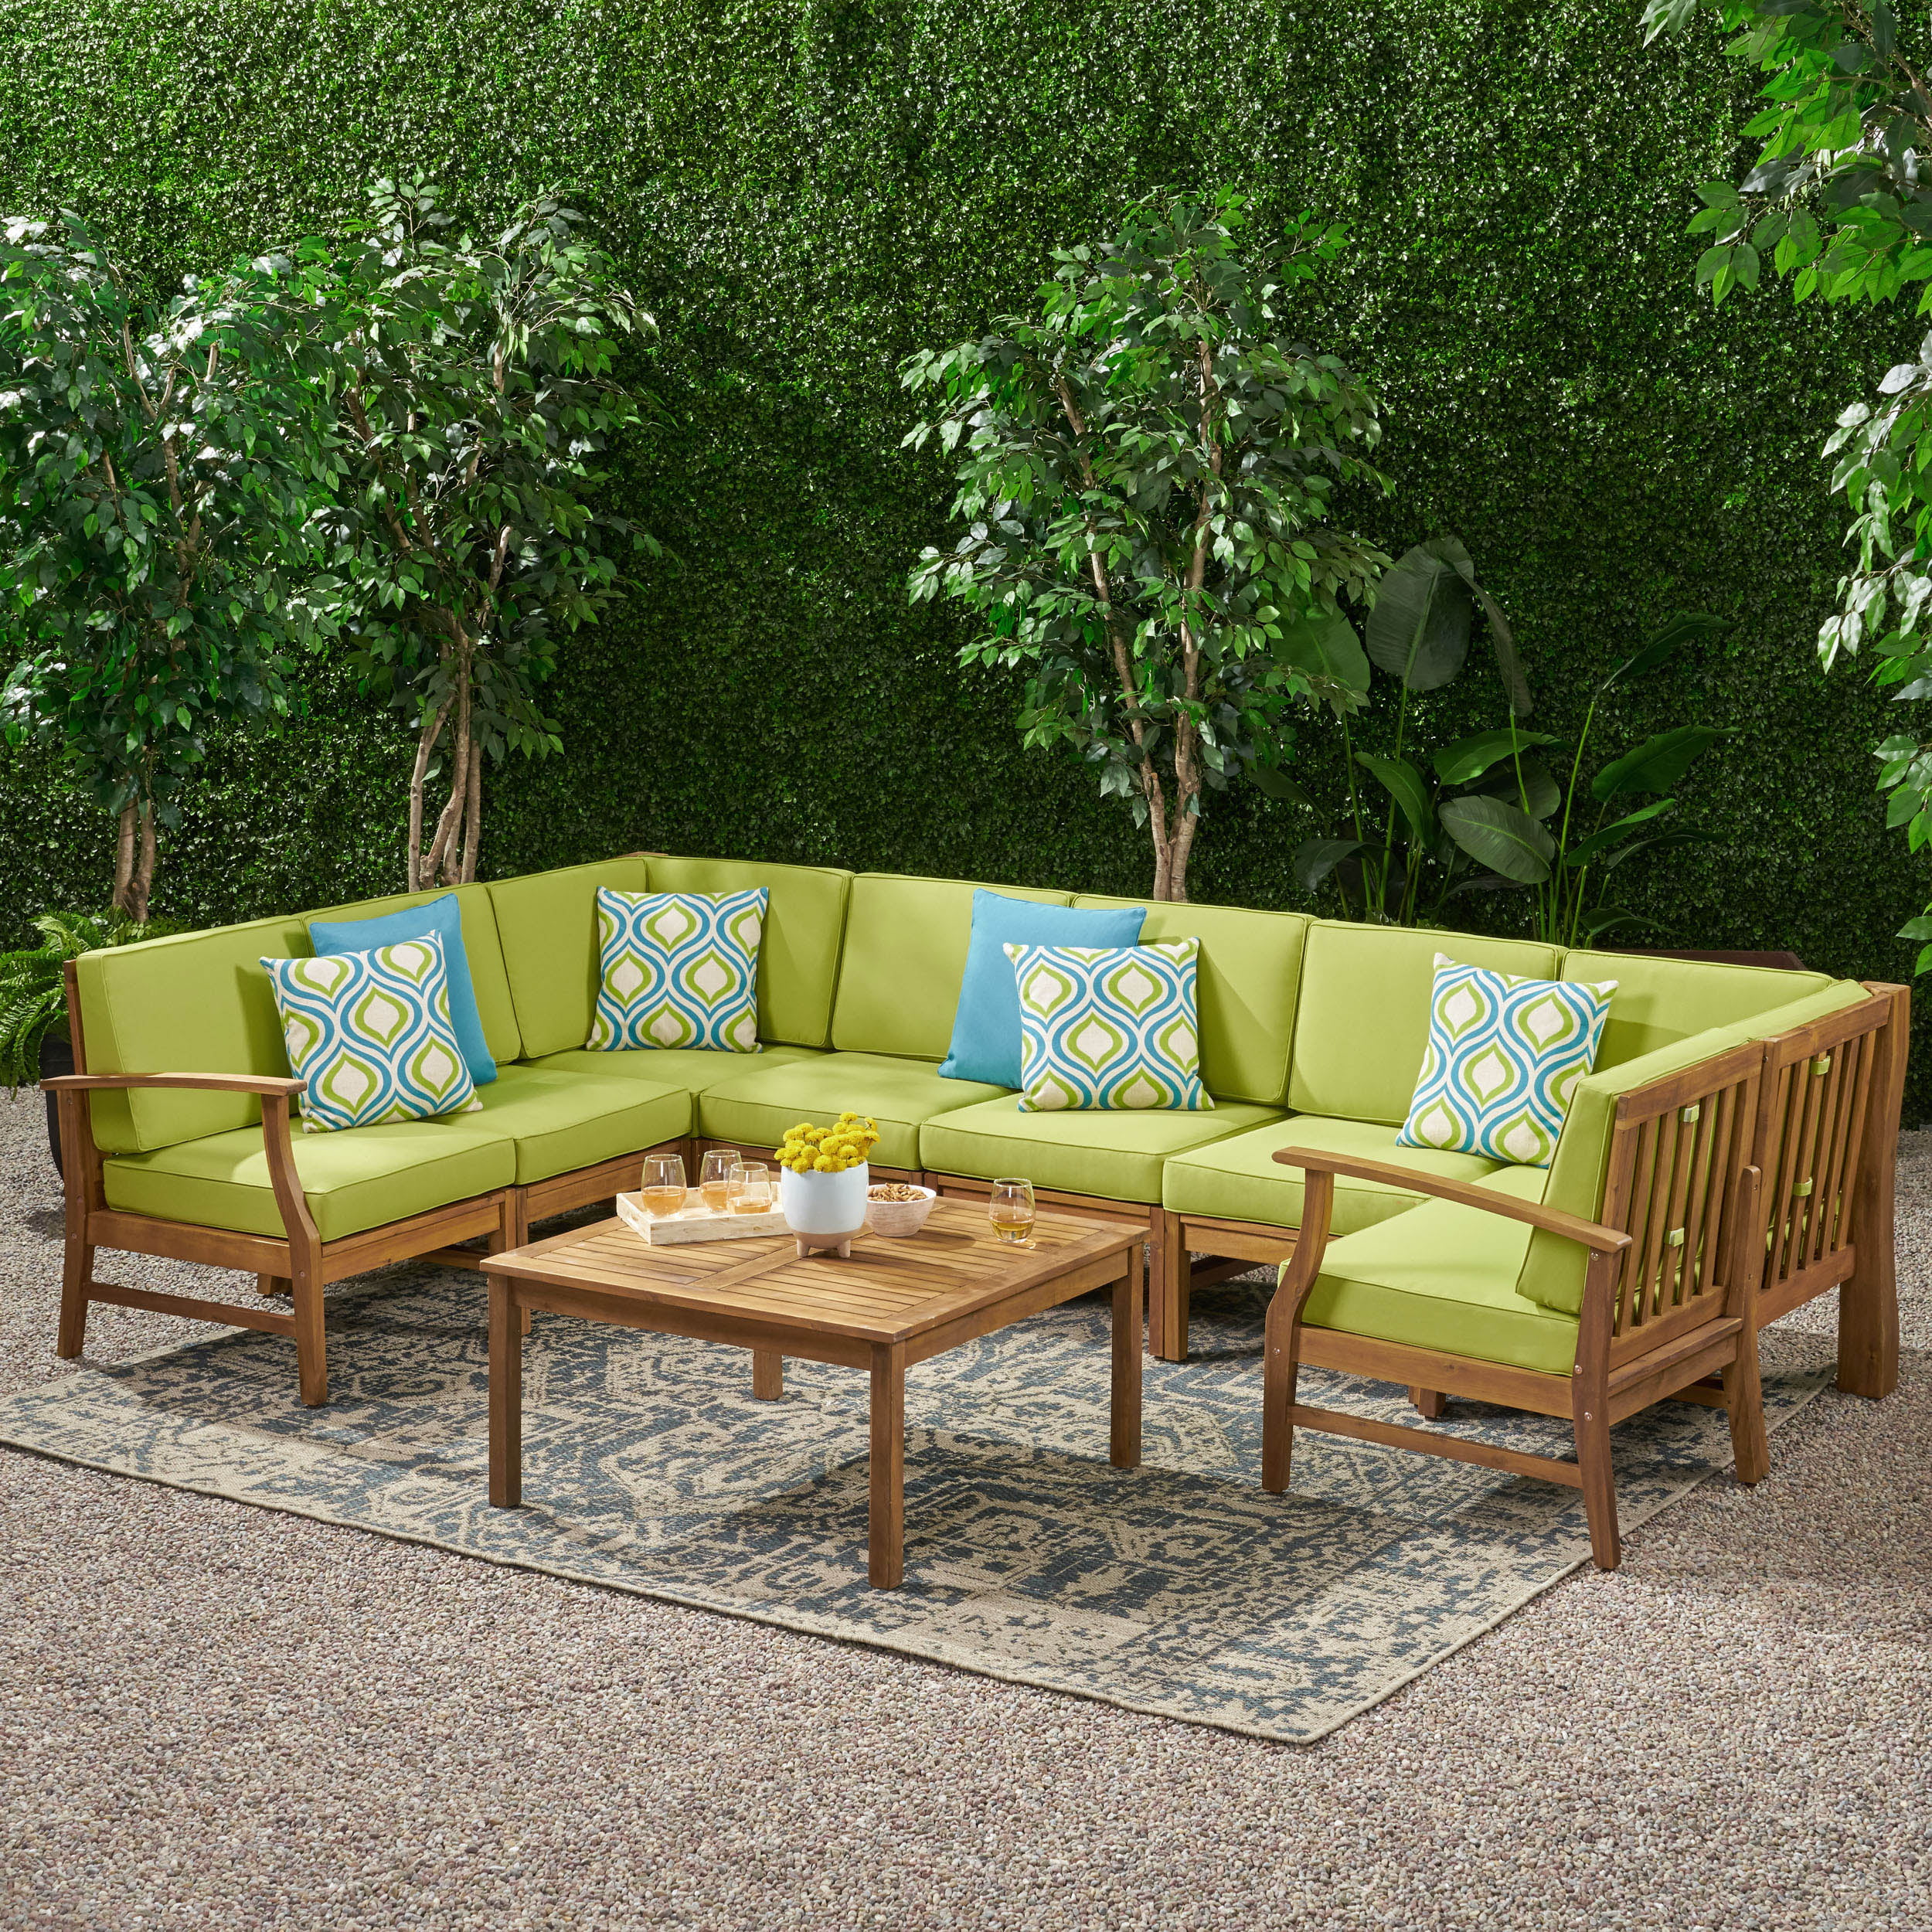 Create A Stylish Outdoor Oasis With Teak Furniture